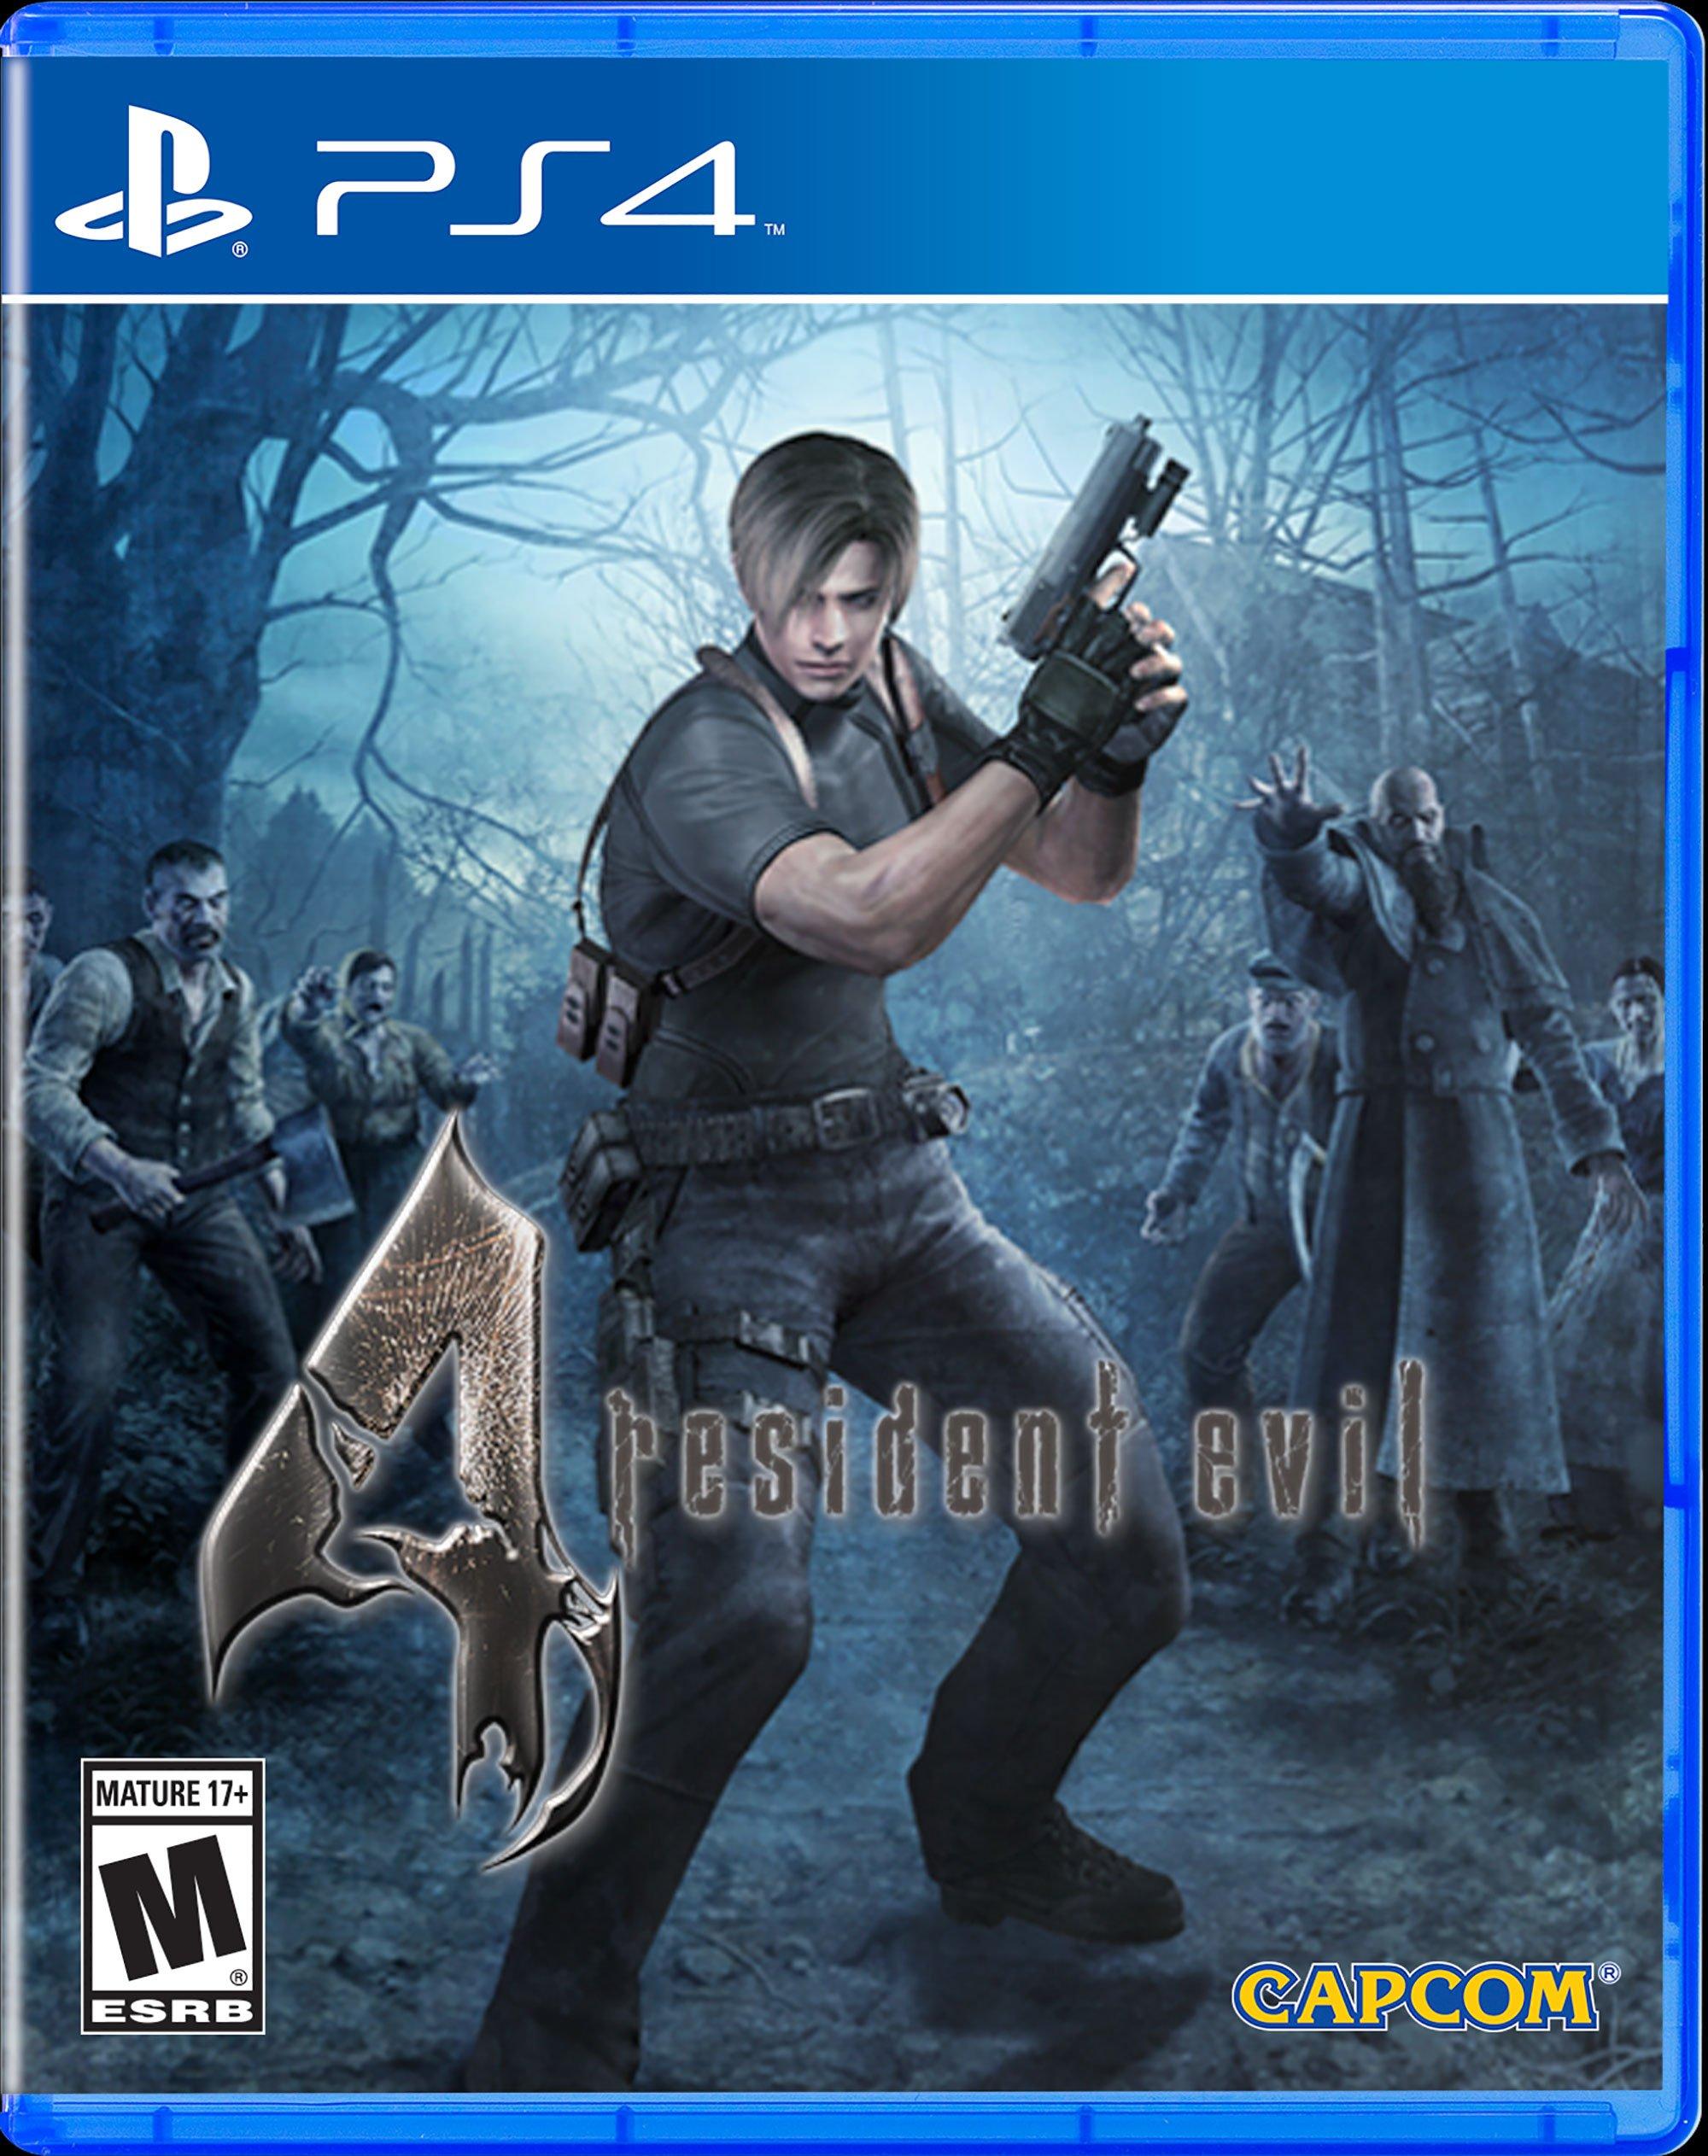 Resident Evil 4 PlayStation 5 upgrade is free if you have the PS4 version